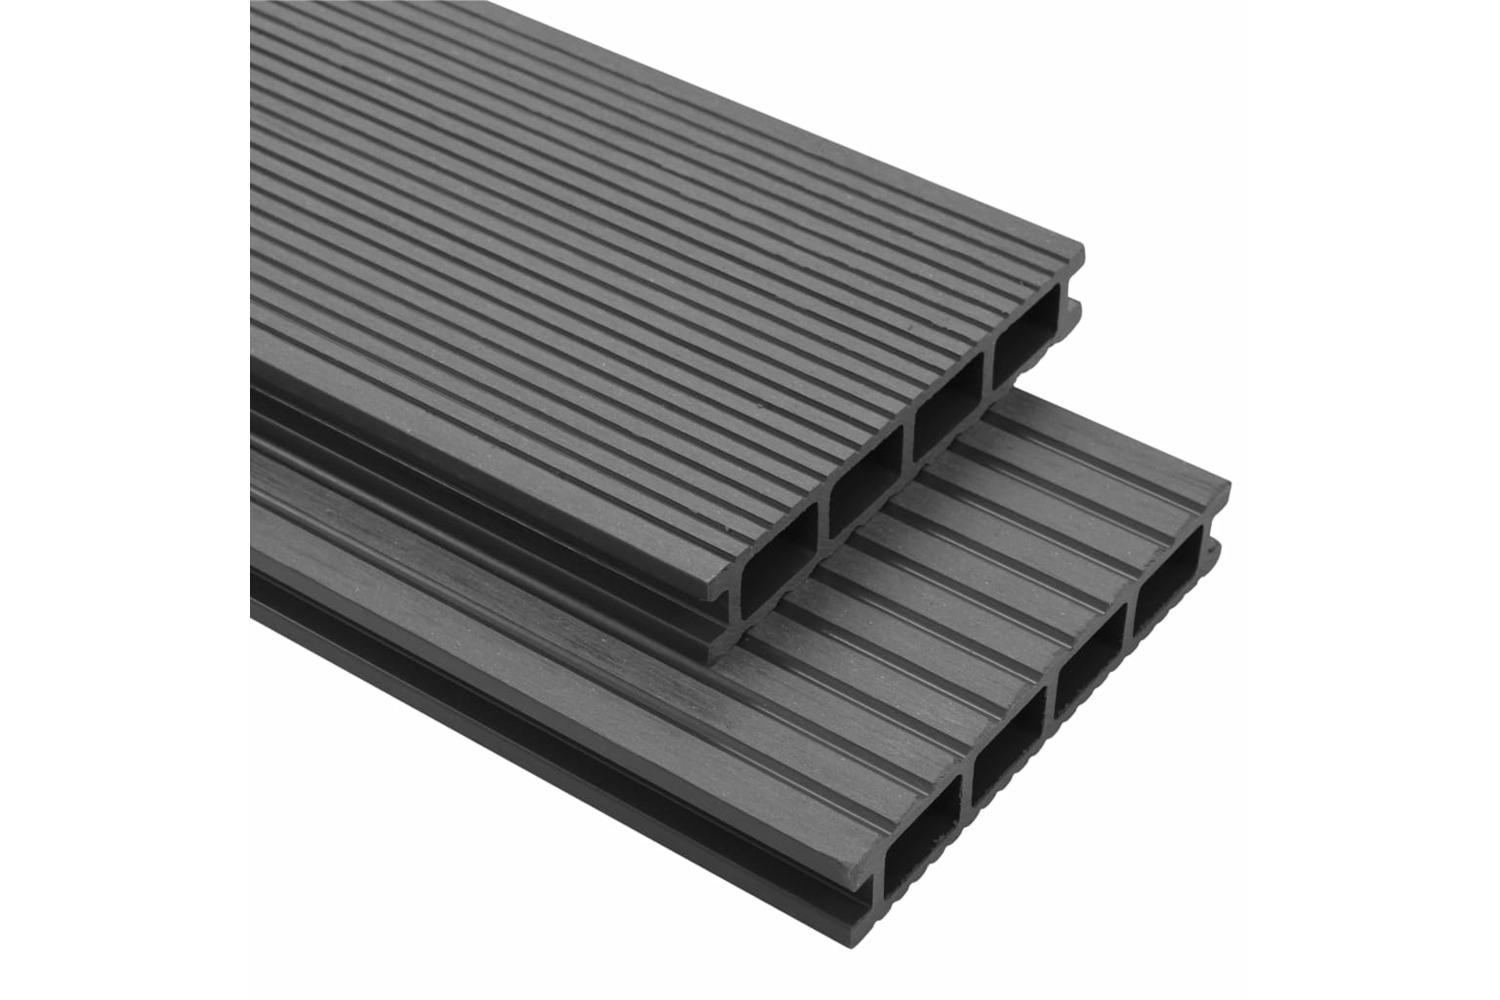 Vidaxl 273805 Wpc Decking Boards With Accessories 30 M2 2.2